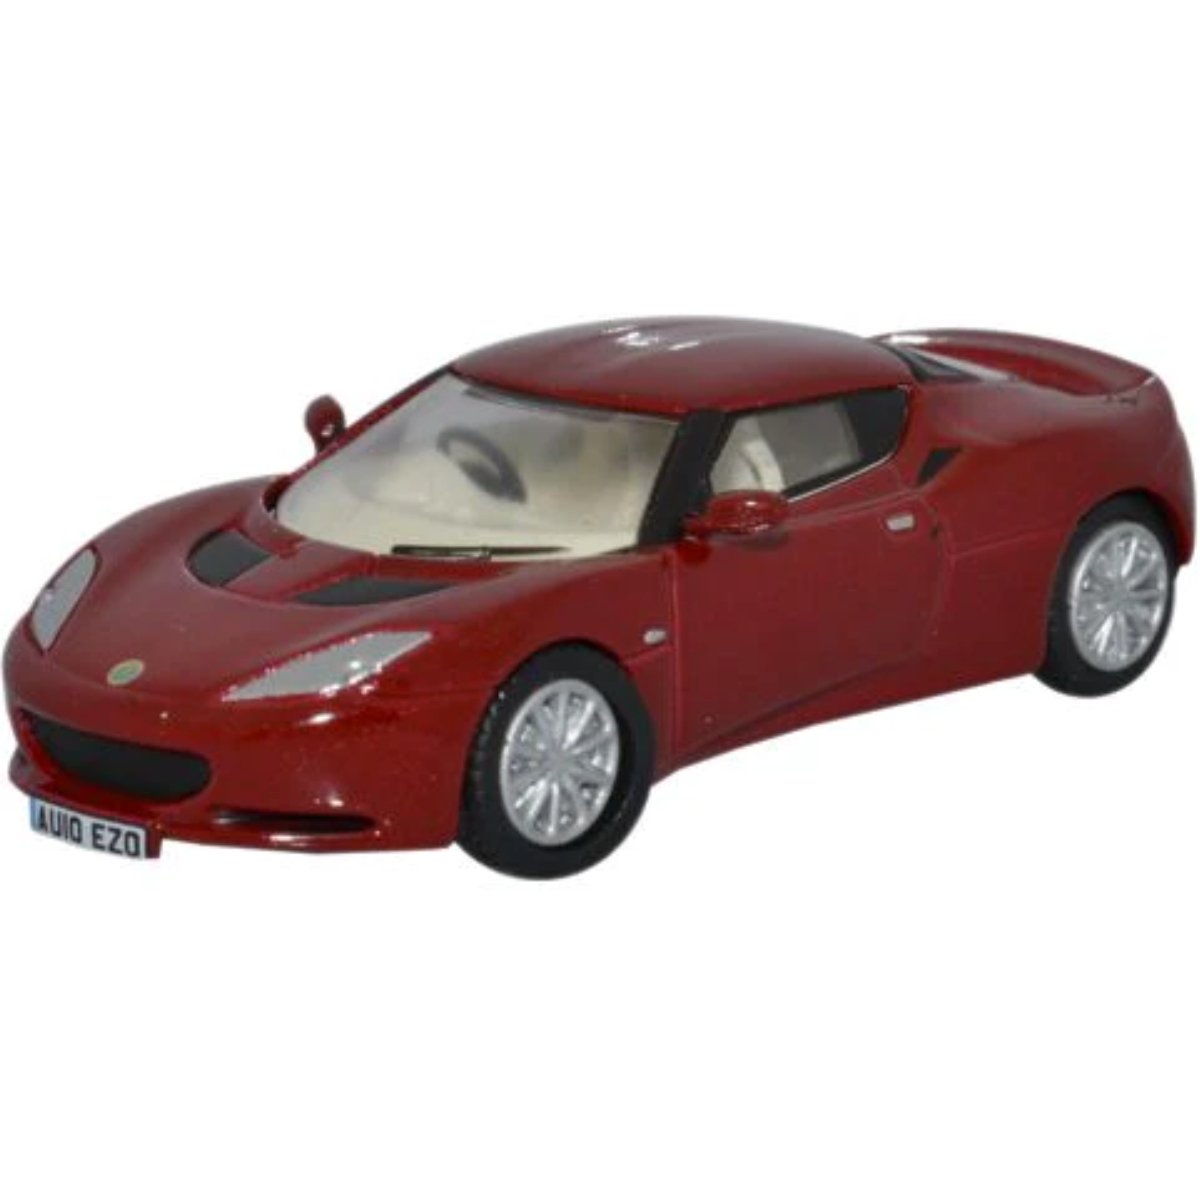 Oxford Diecast 76LEV001 Lotus Evora Canyon Red/Oyster - Phillips Hobbies